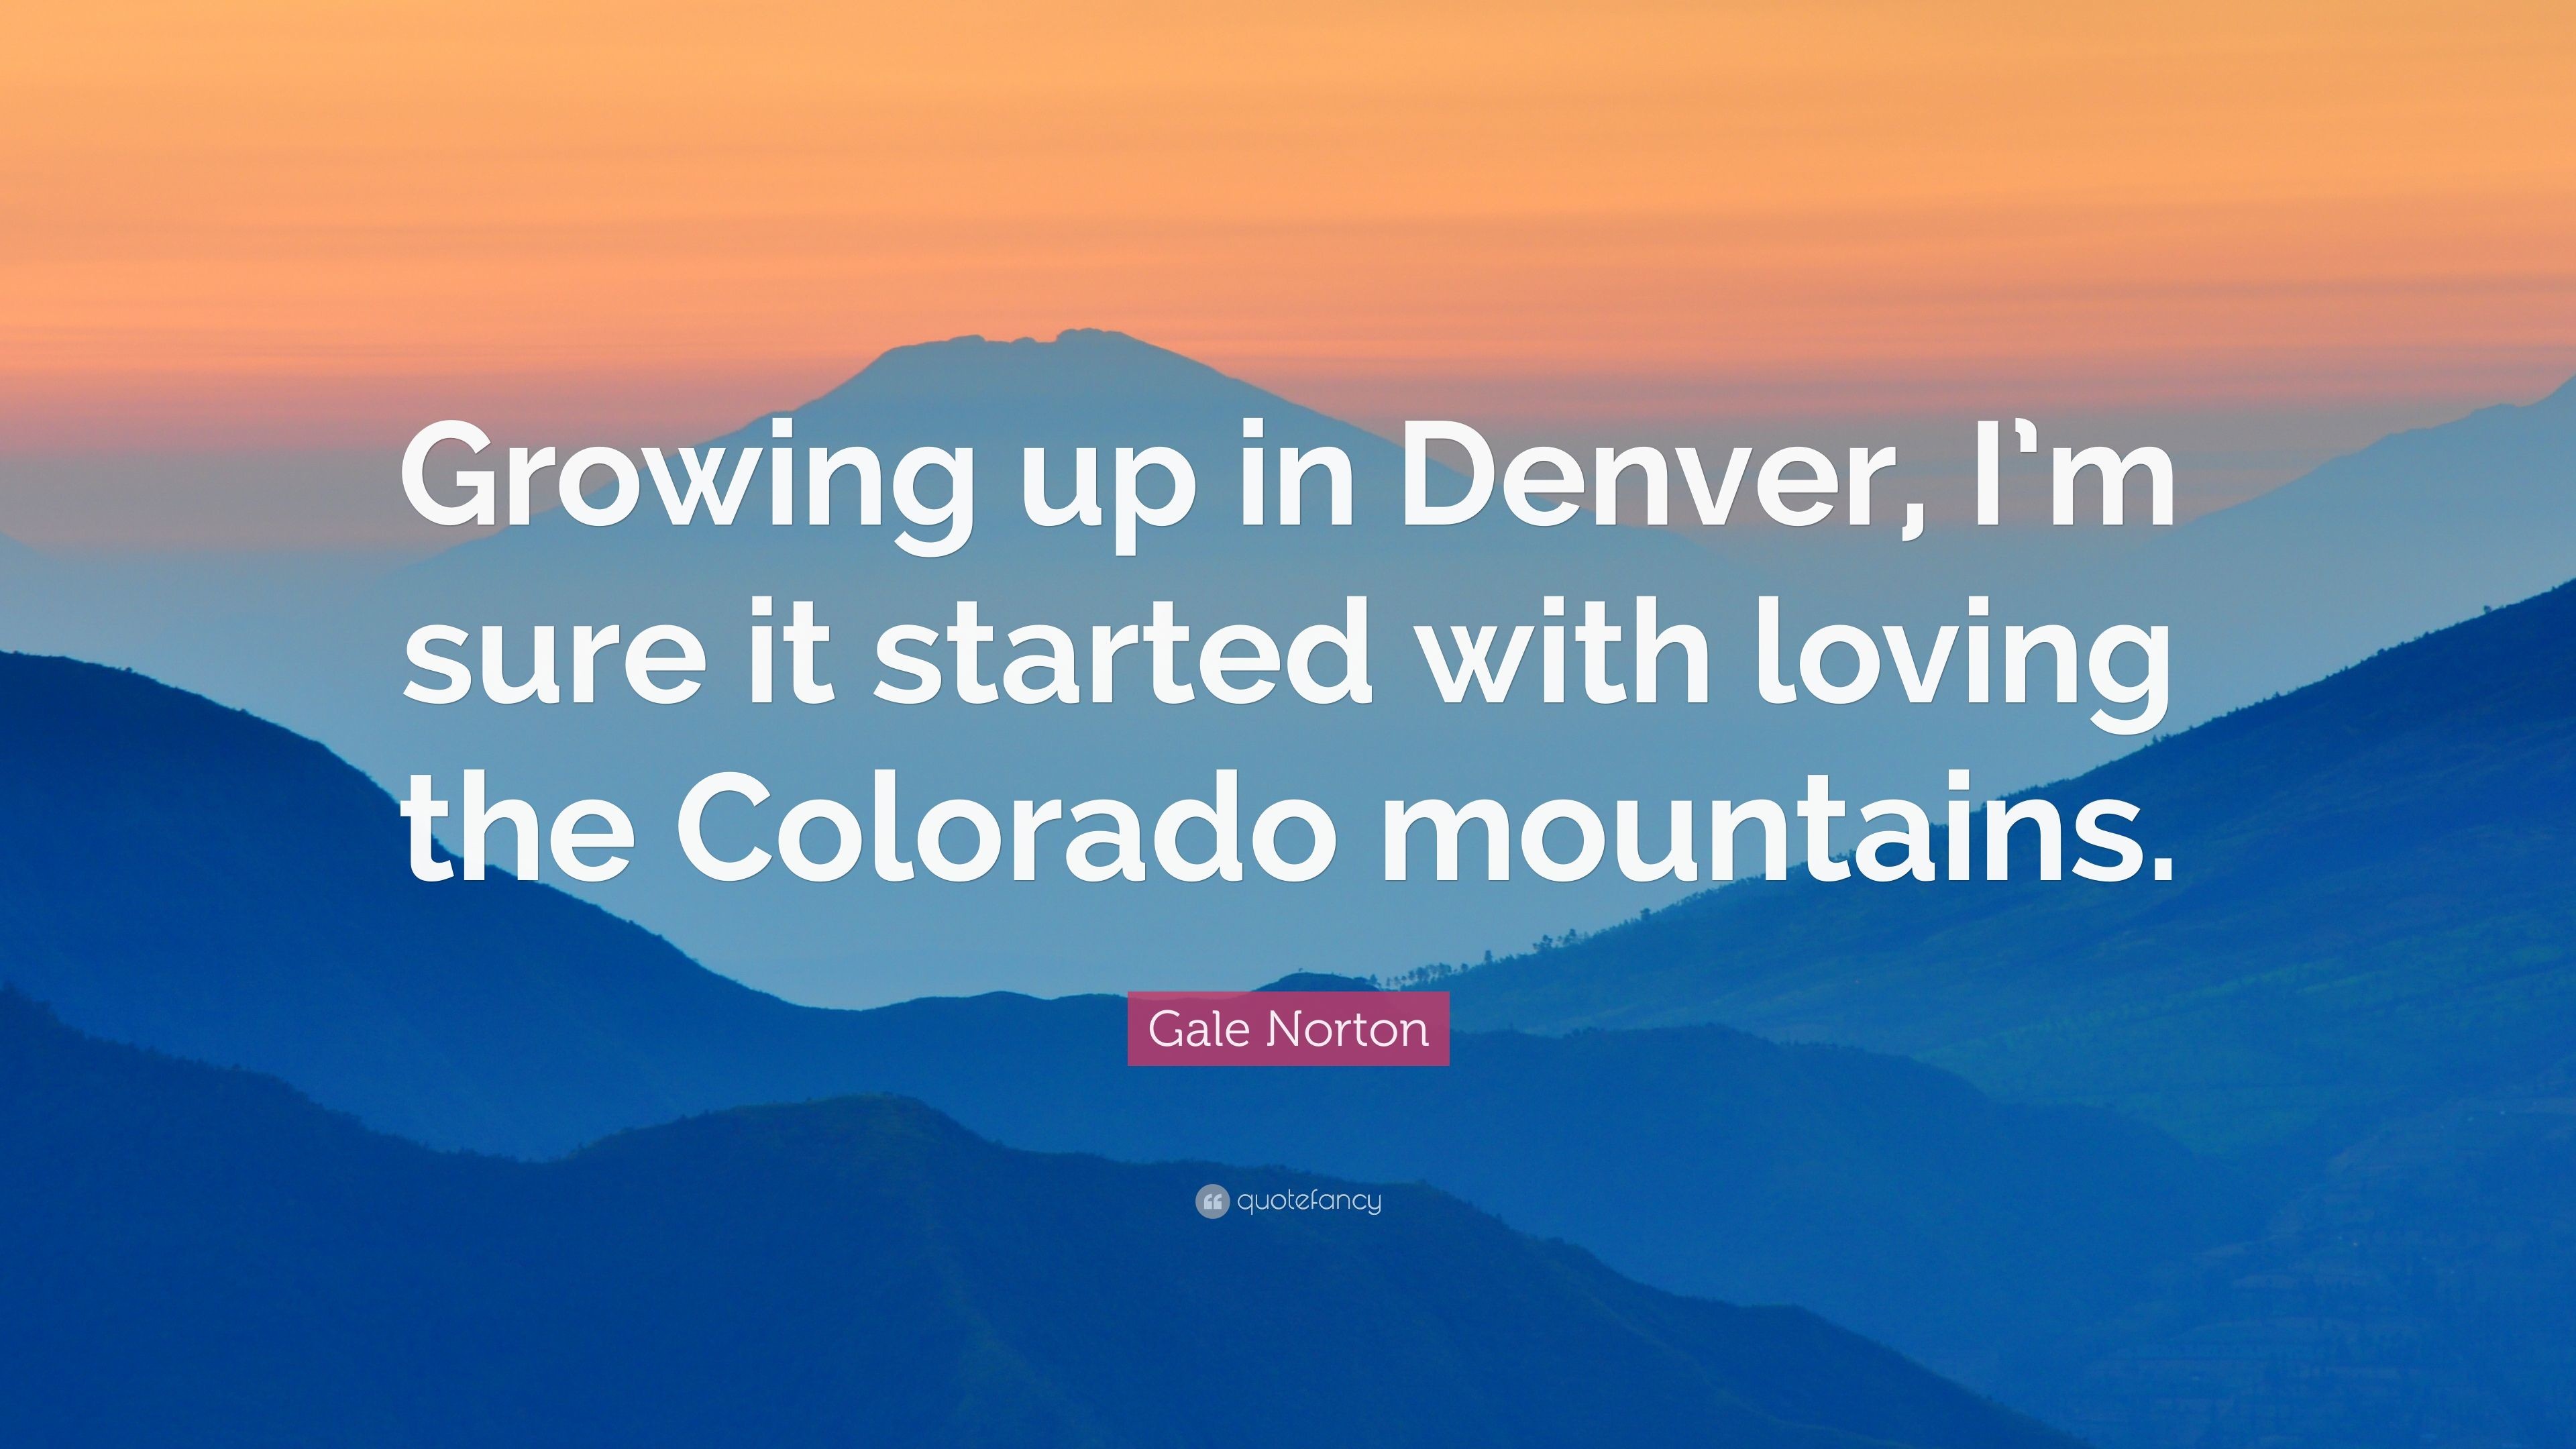 3840x2160 Gale Norton Quote: “Growing up in Denver, I'm sure it started